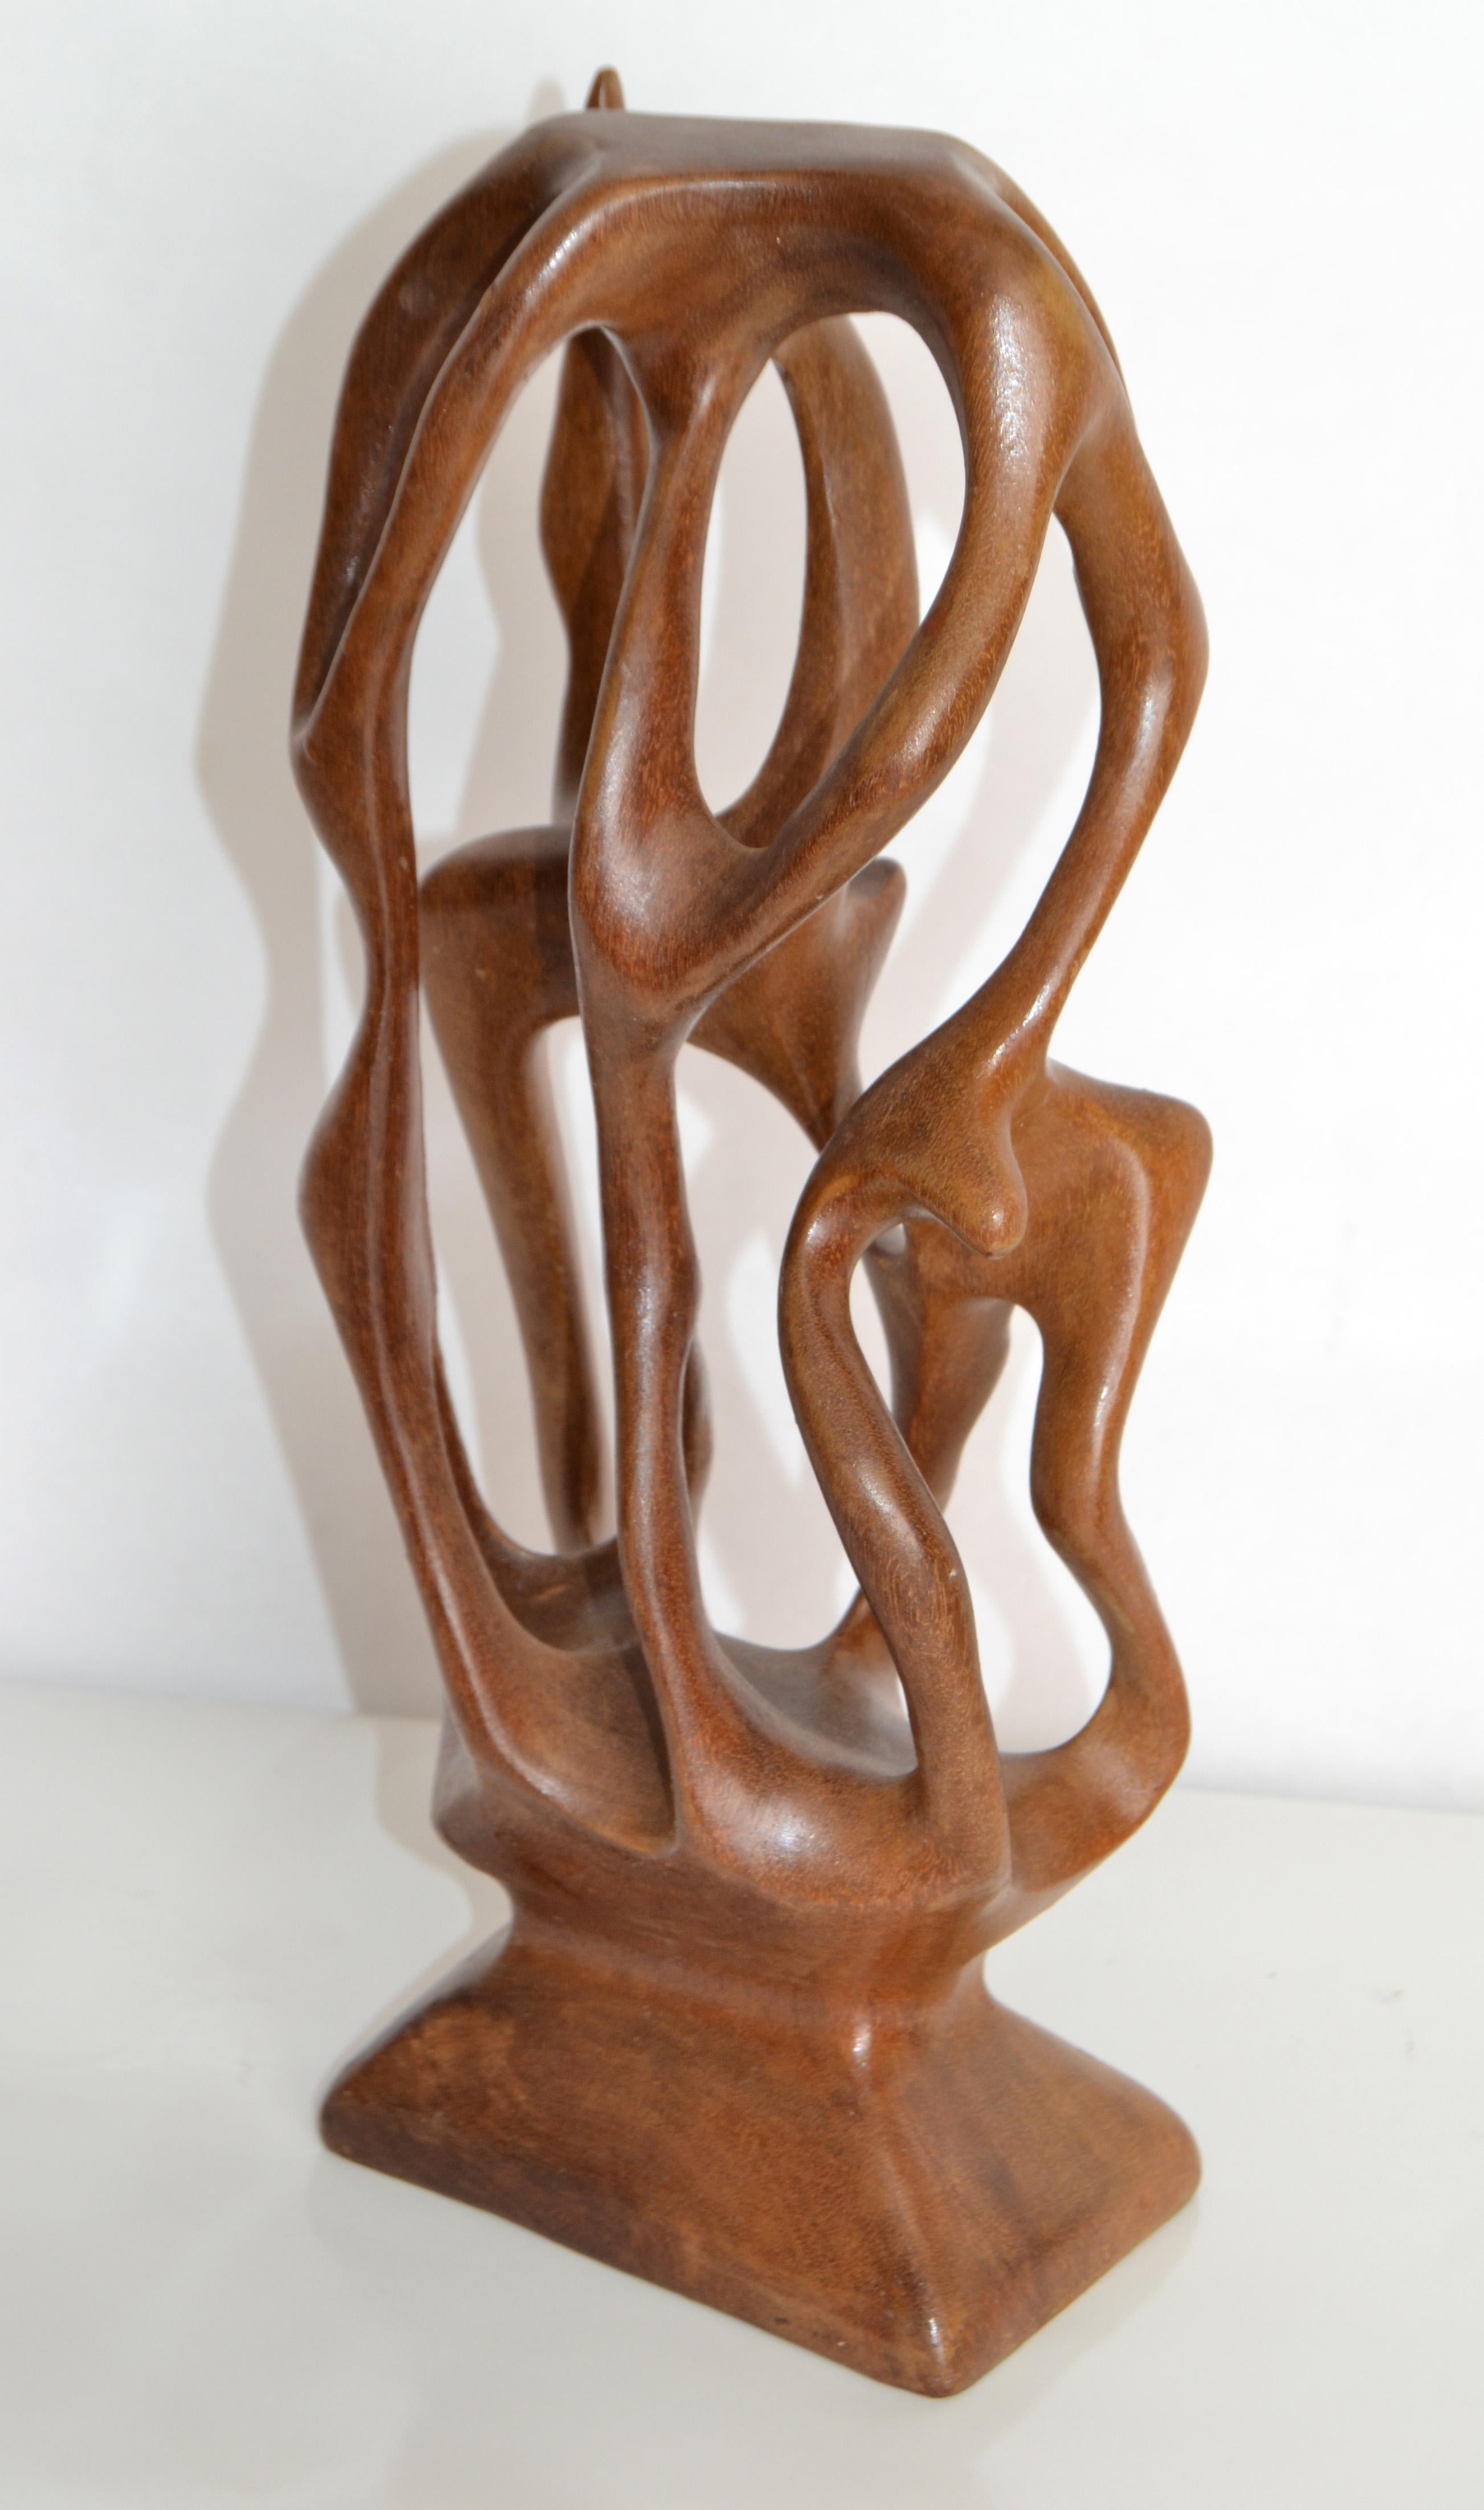 Charming free-form organic wooden sculpture is carved from one piece of Yew with its twisting curves colliding all angles. 
Yew trees are some of the oldest trees in the world. It is grown in many exotic shapes which determines the carving into a